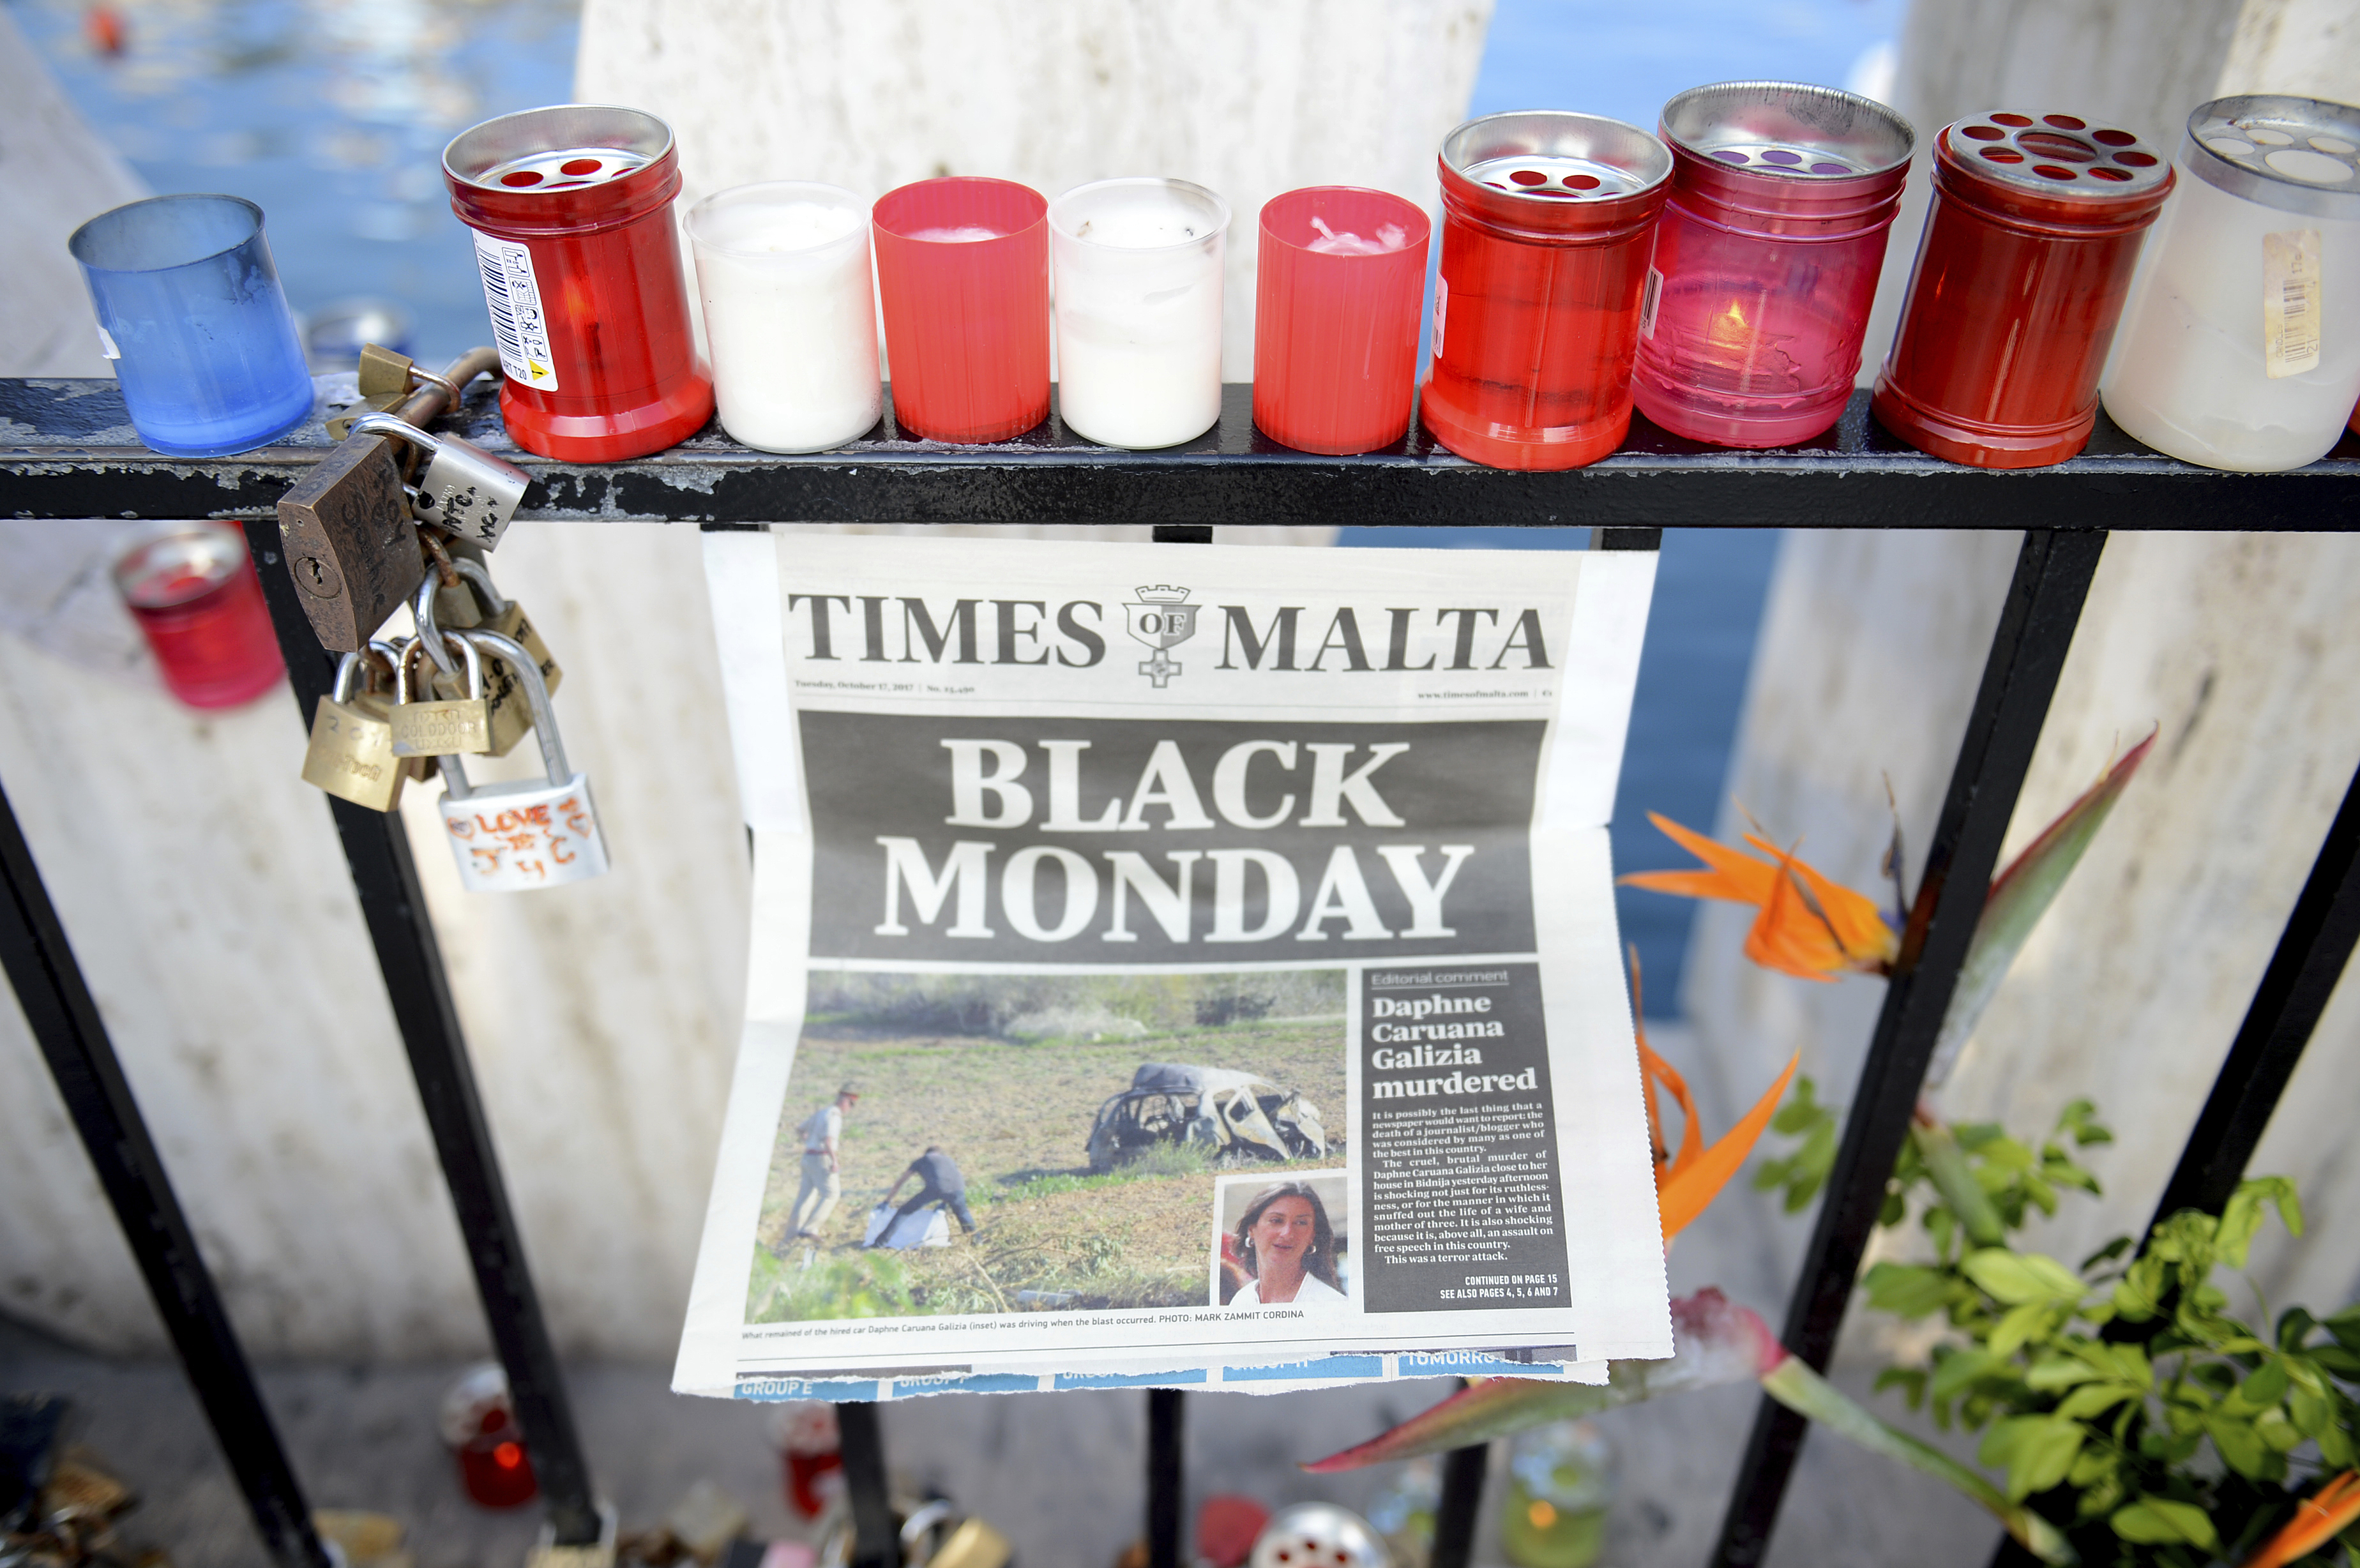 Candles, notes and paper cuttings lie next to the Love Monument in St. Julian, Malta on October 17, 2017, the day after investigative journalist Daphne Caruana Galizia was killed with a car bomb